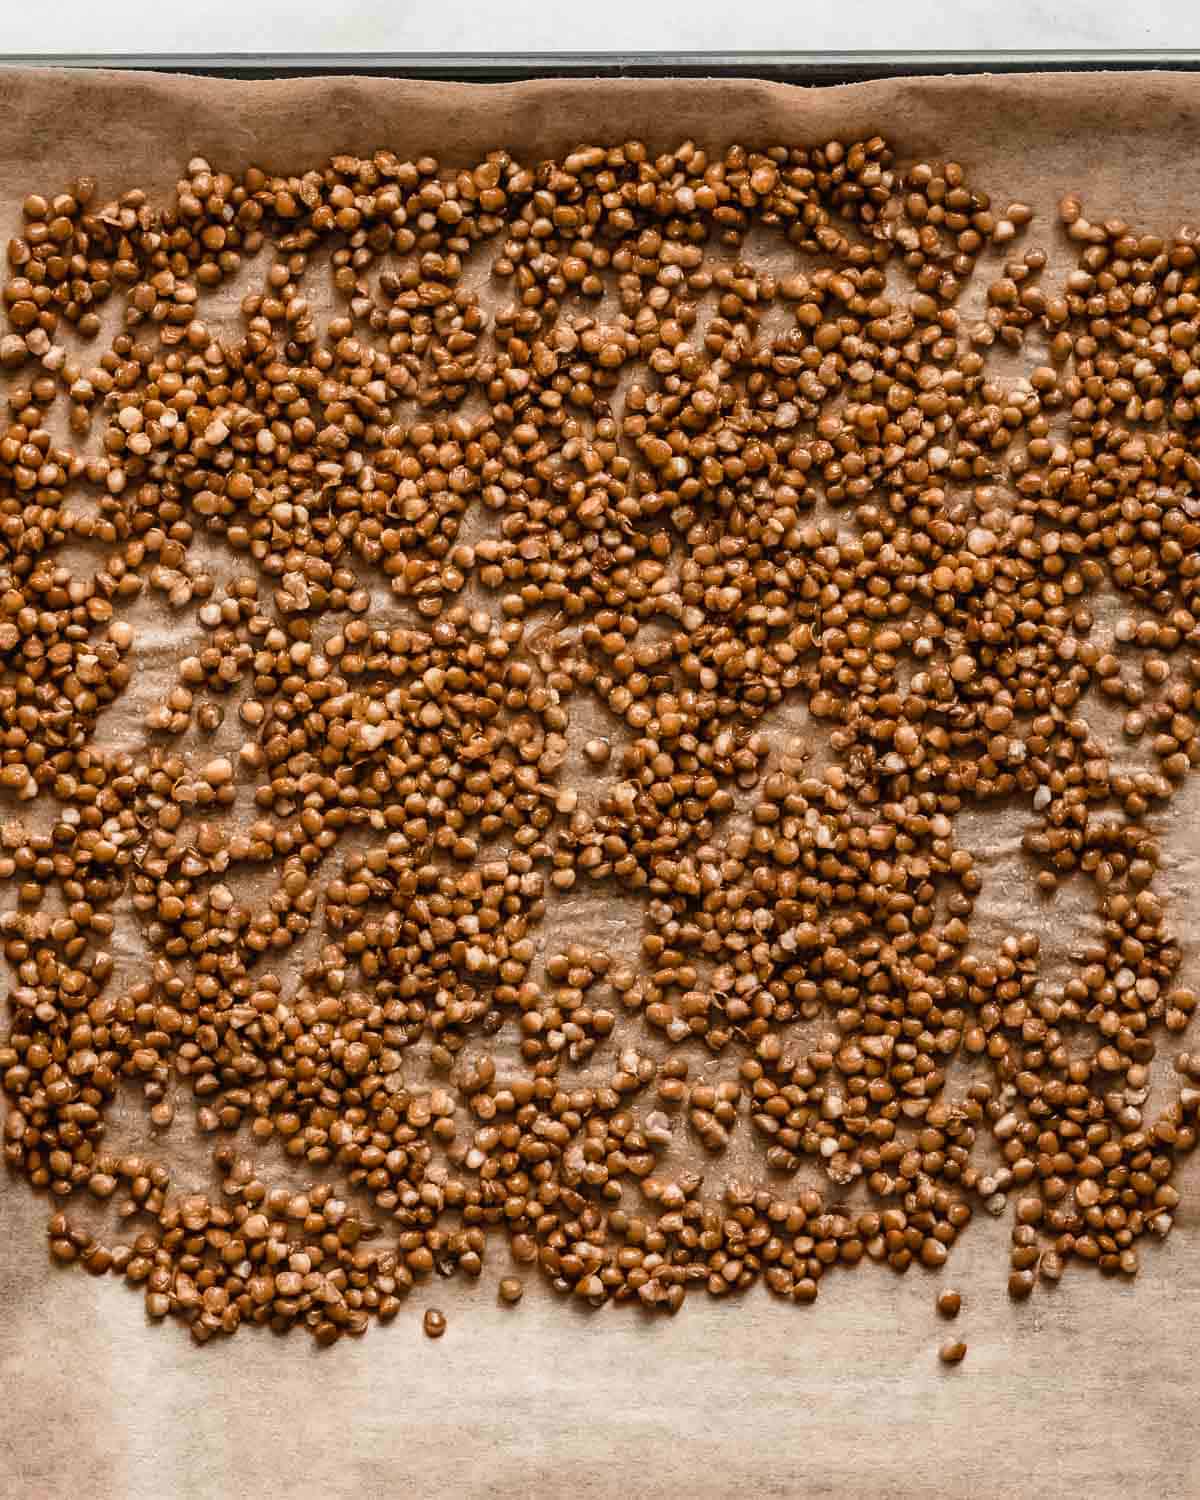 cooked lentils spread out on a baking tray lined with parchment paper.